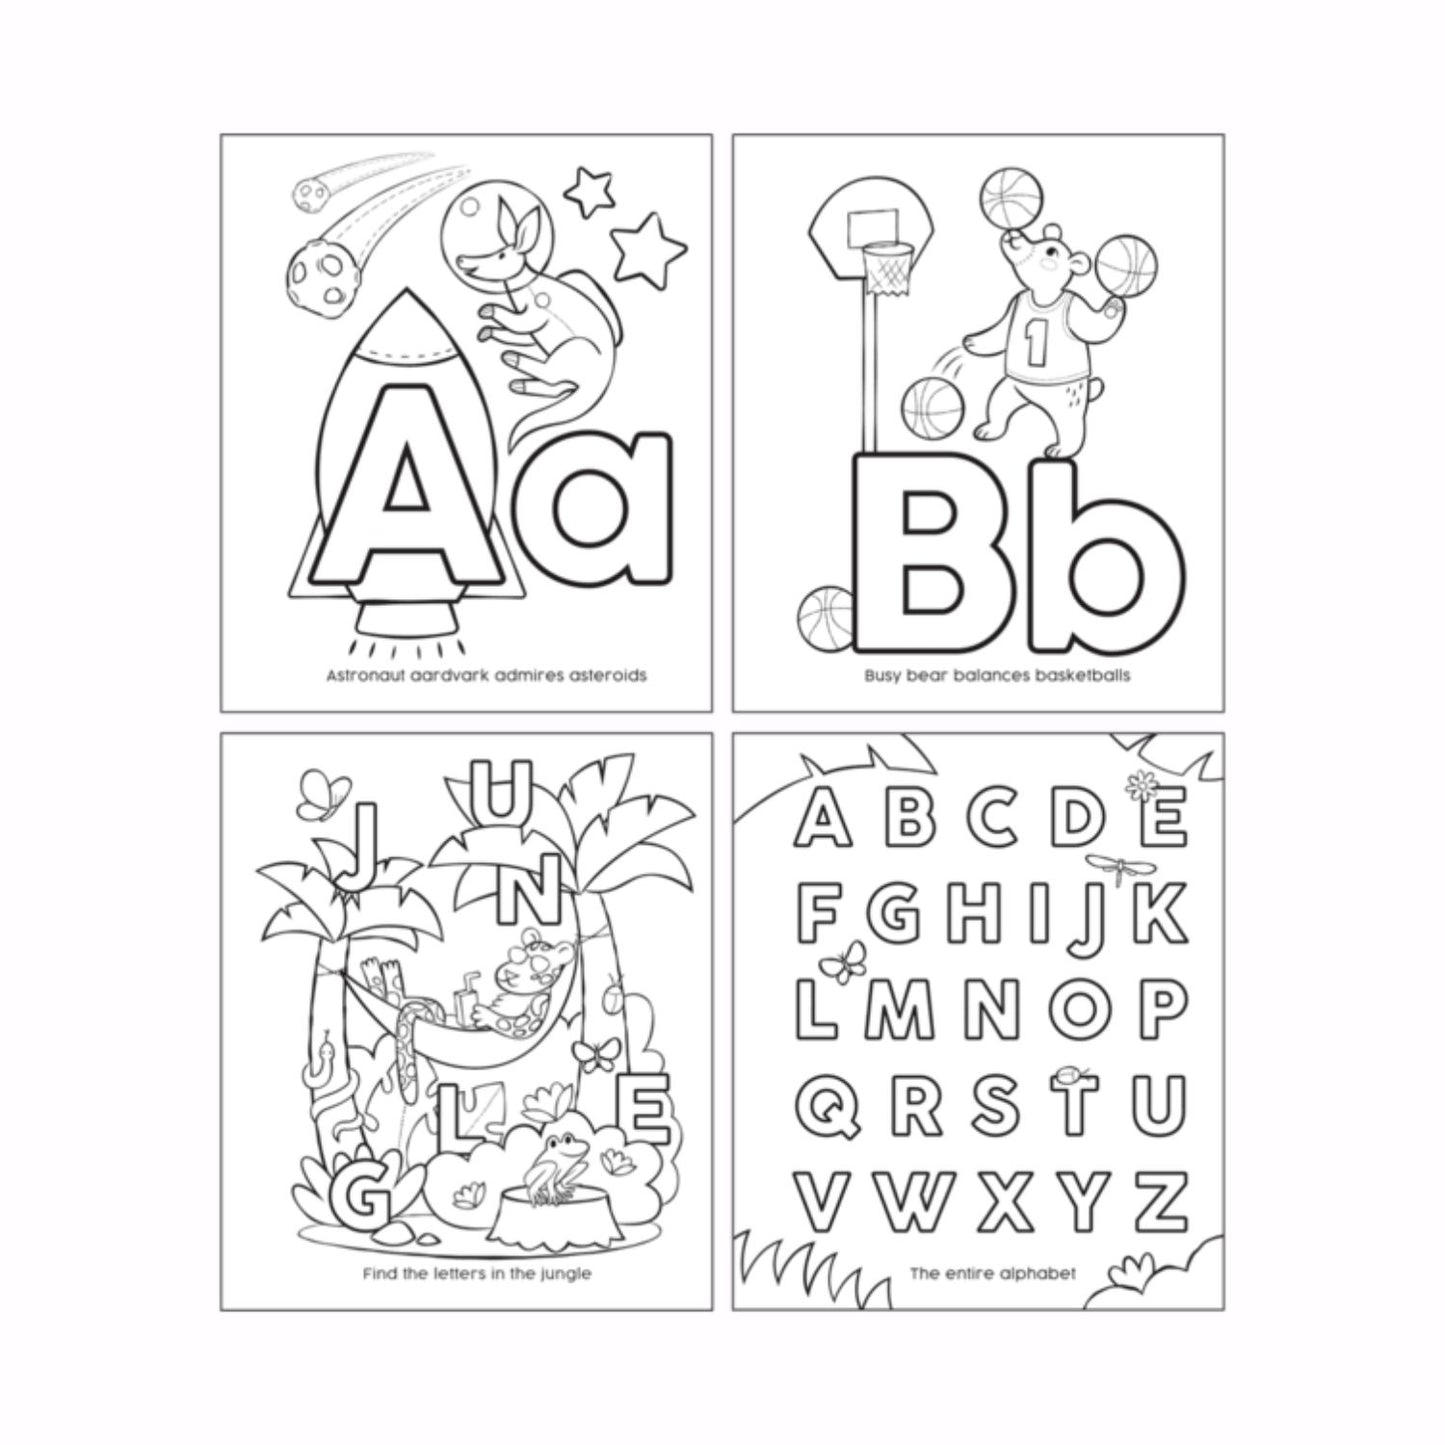 OOLY Toddler Coloring Book - ABC Amazing Animals